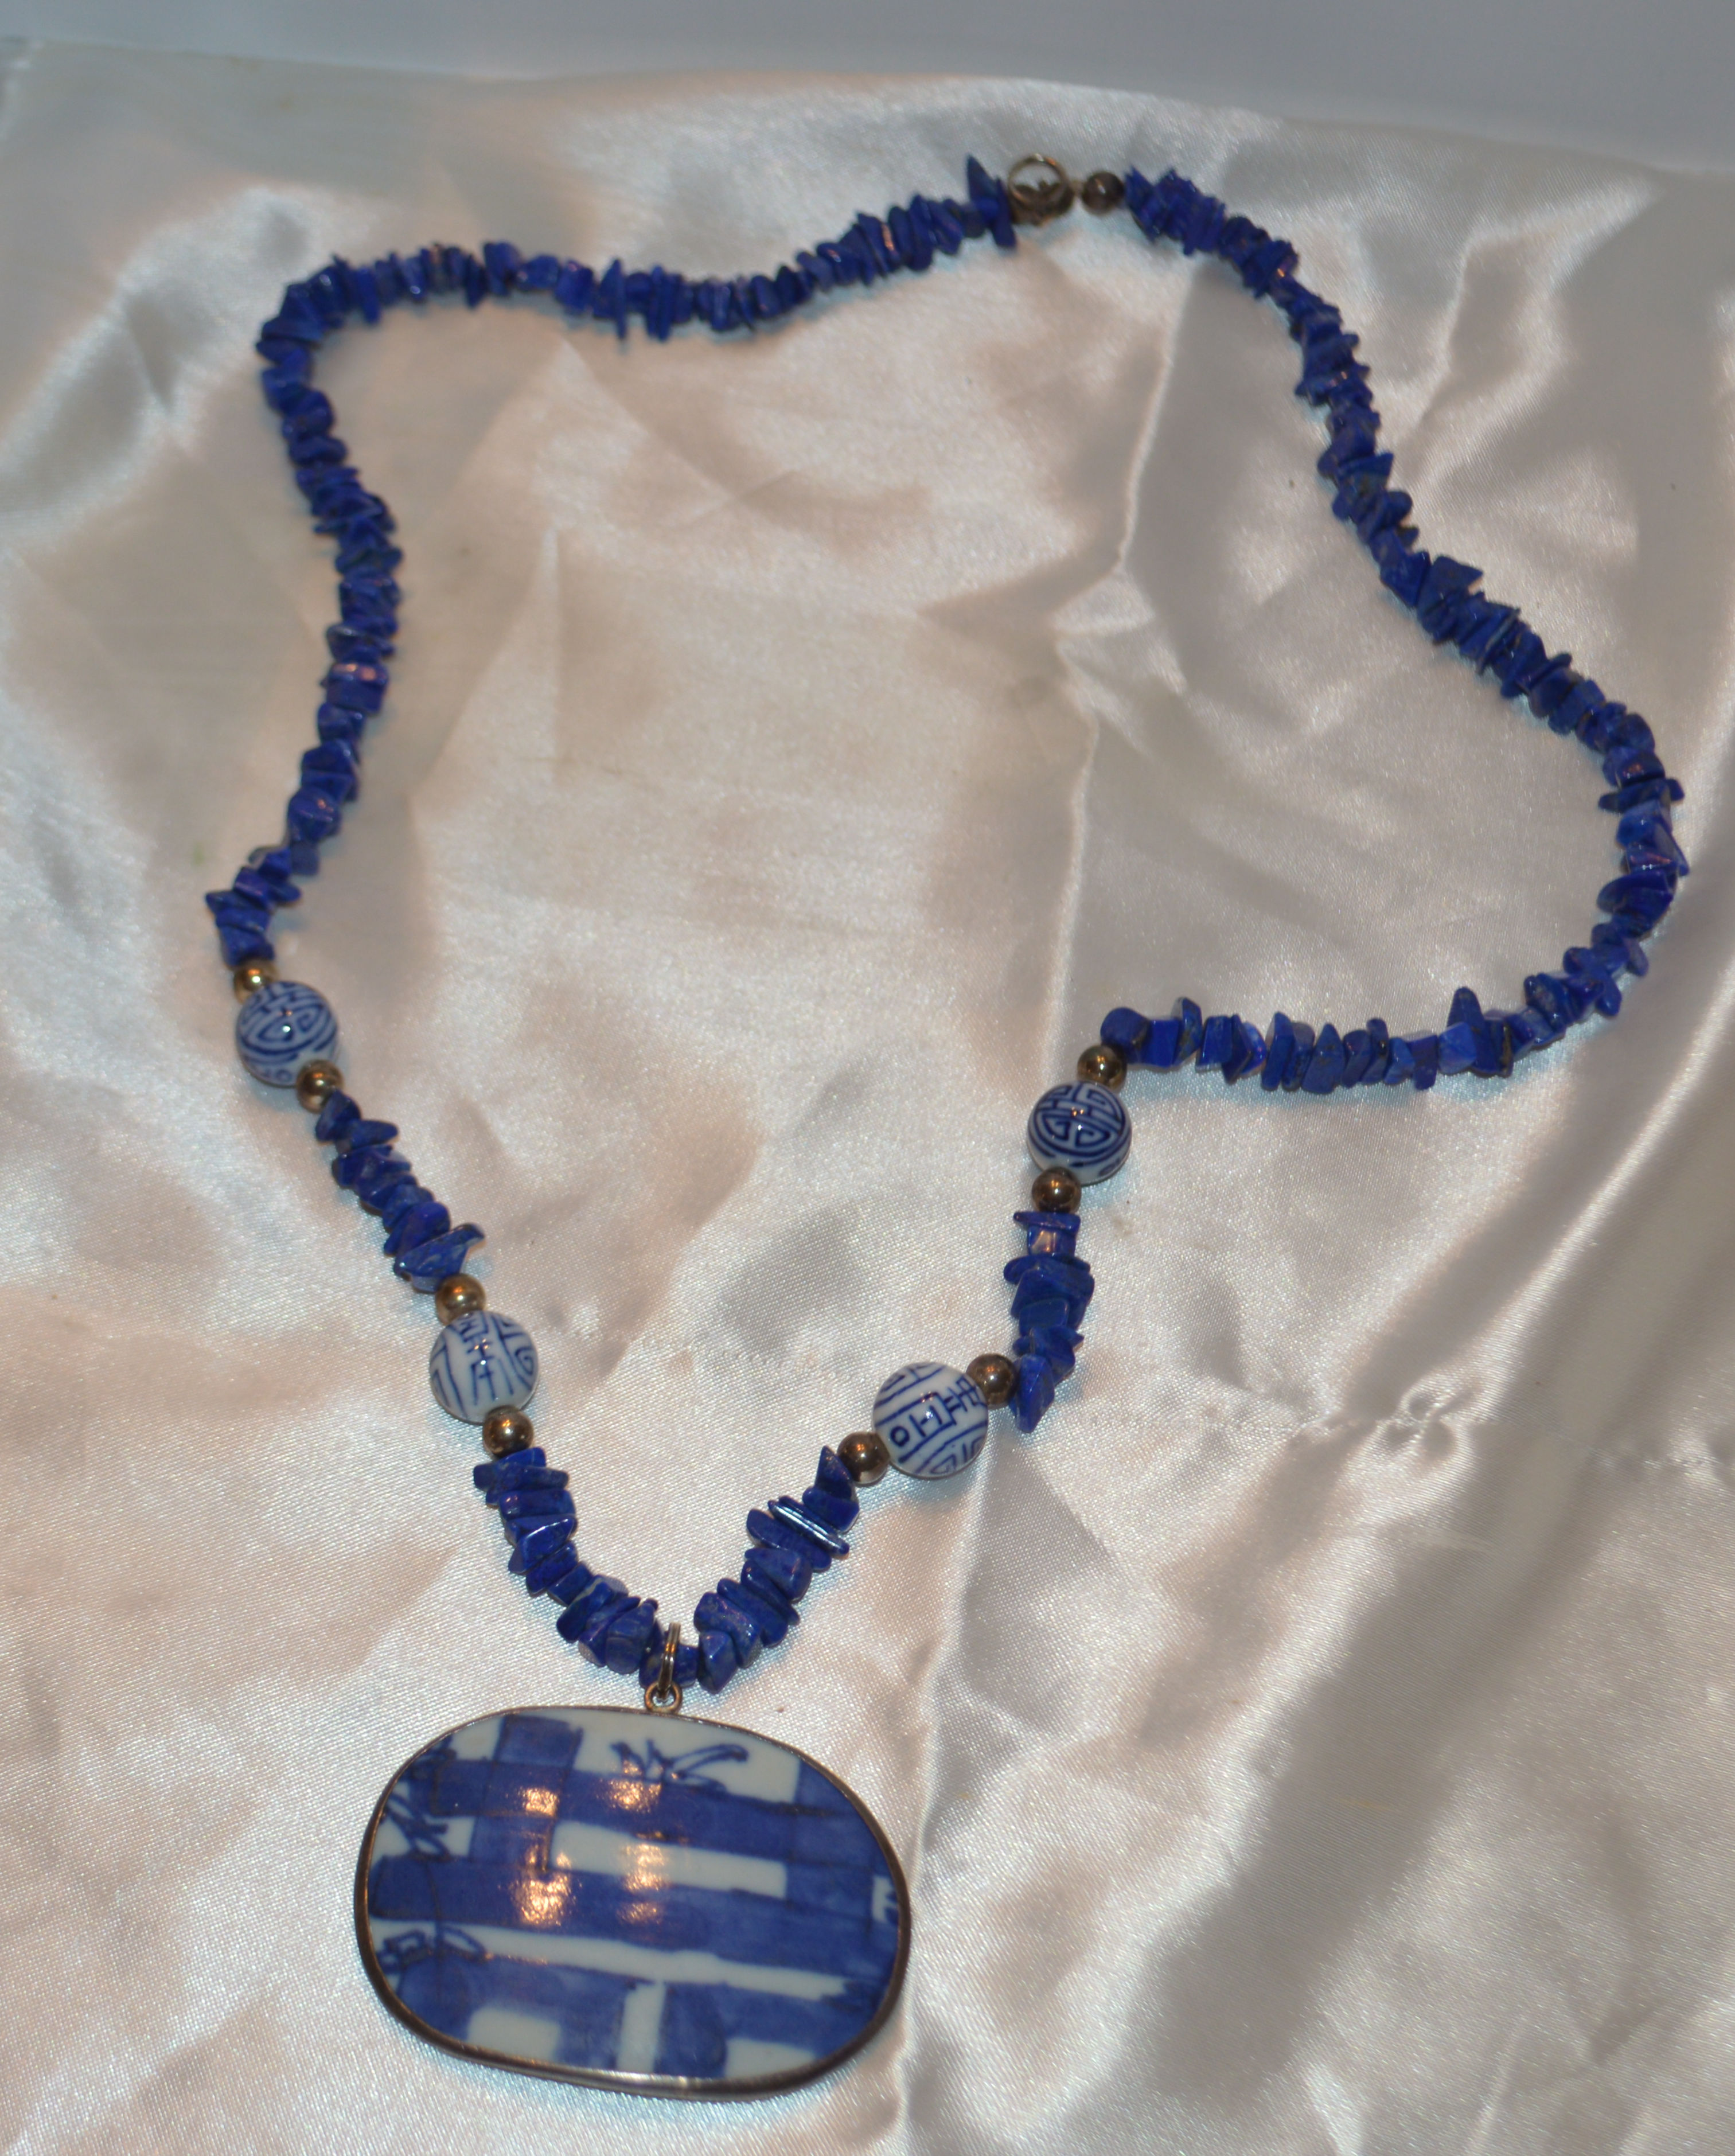 Beautiful blue and silver colored beads necklace